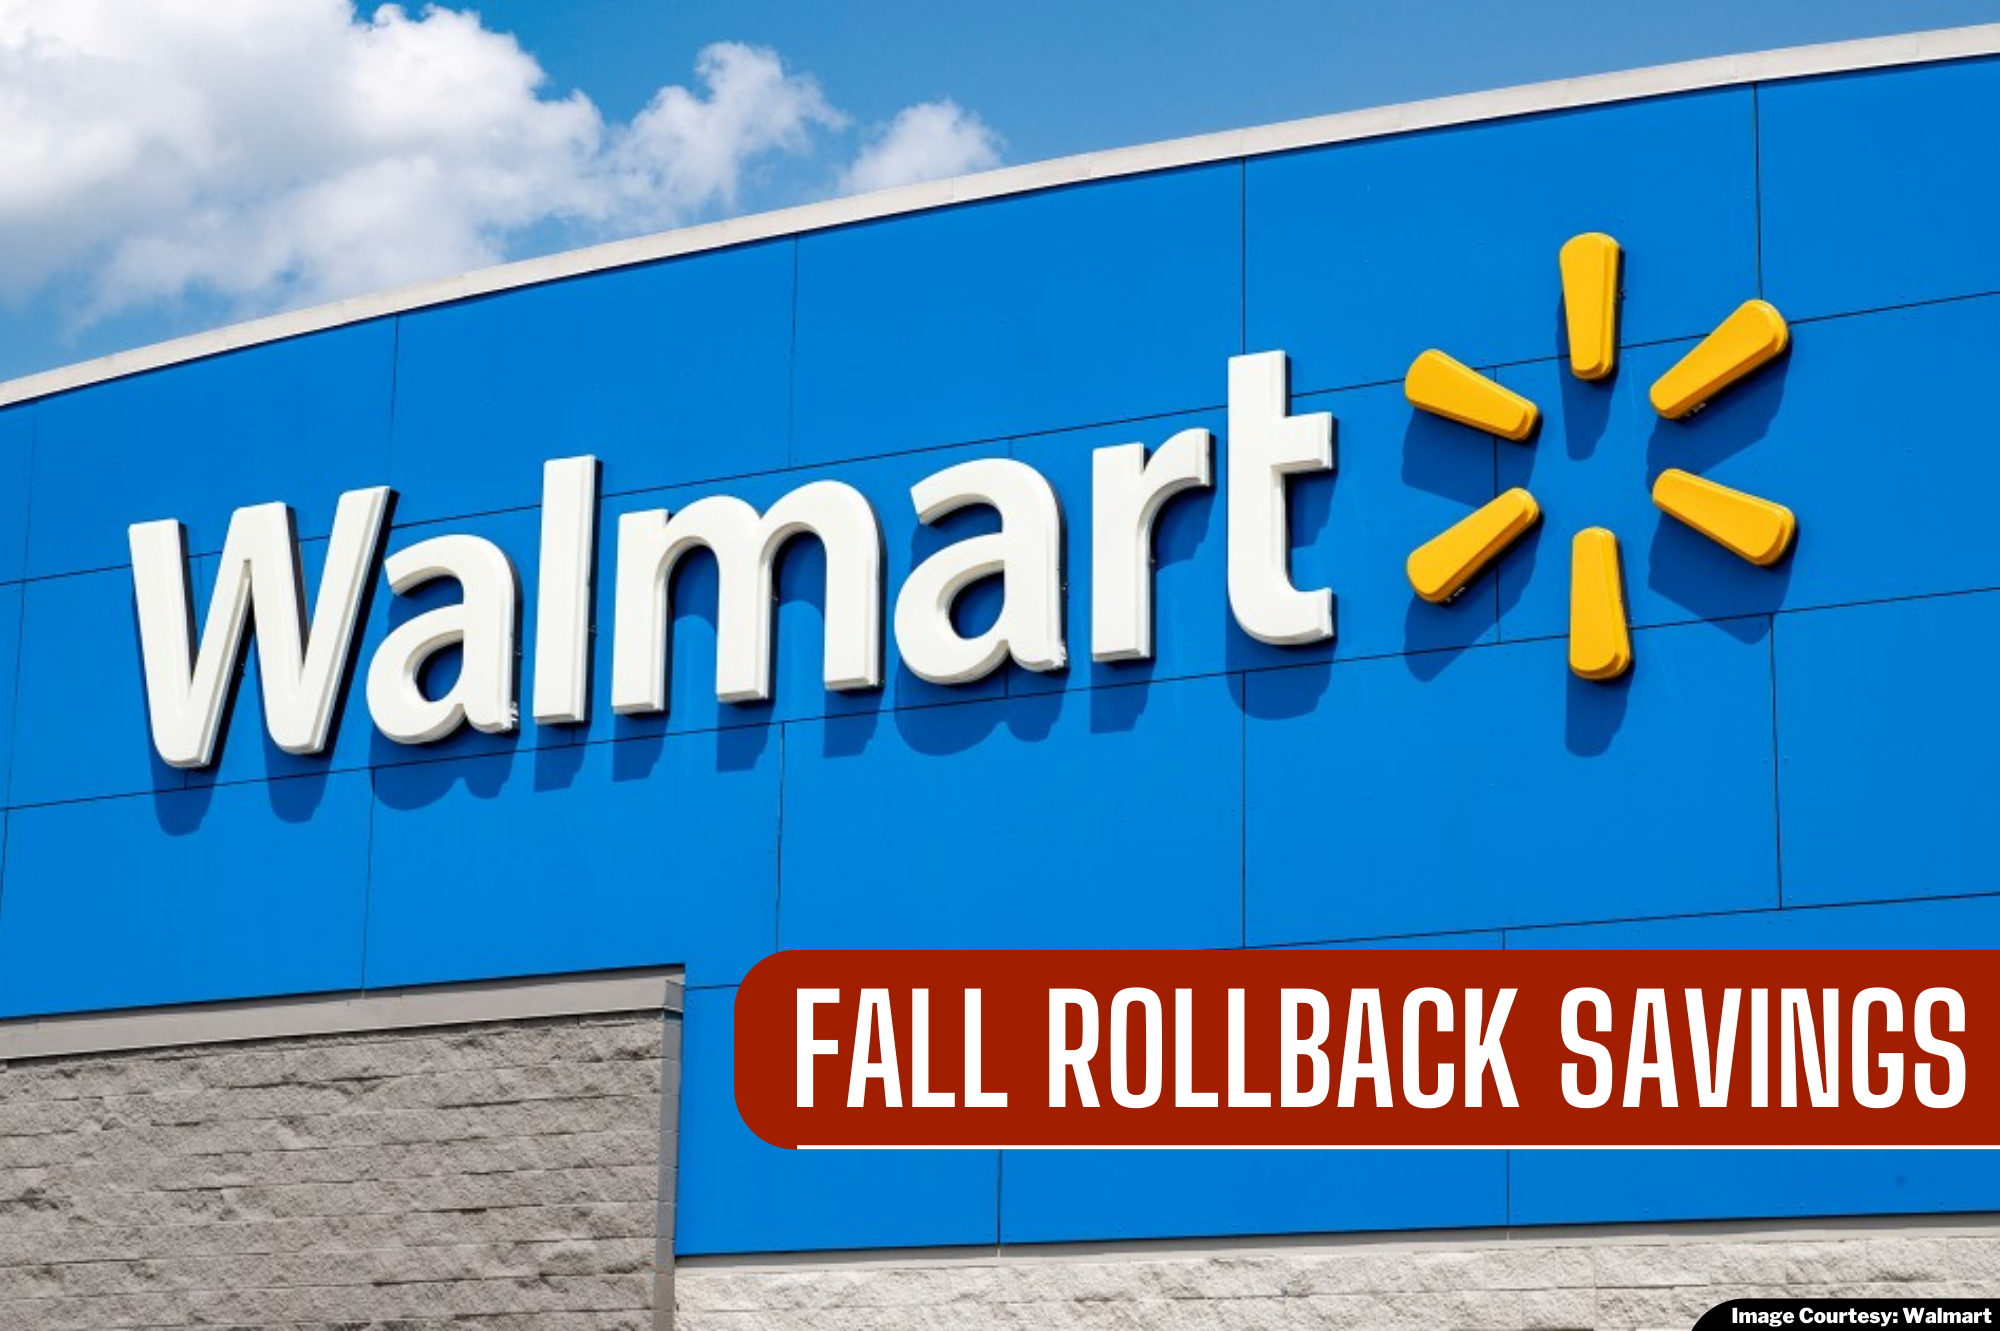 Walmart is Having Rollbacks and More Fall Savings Event to Counter